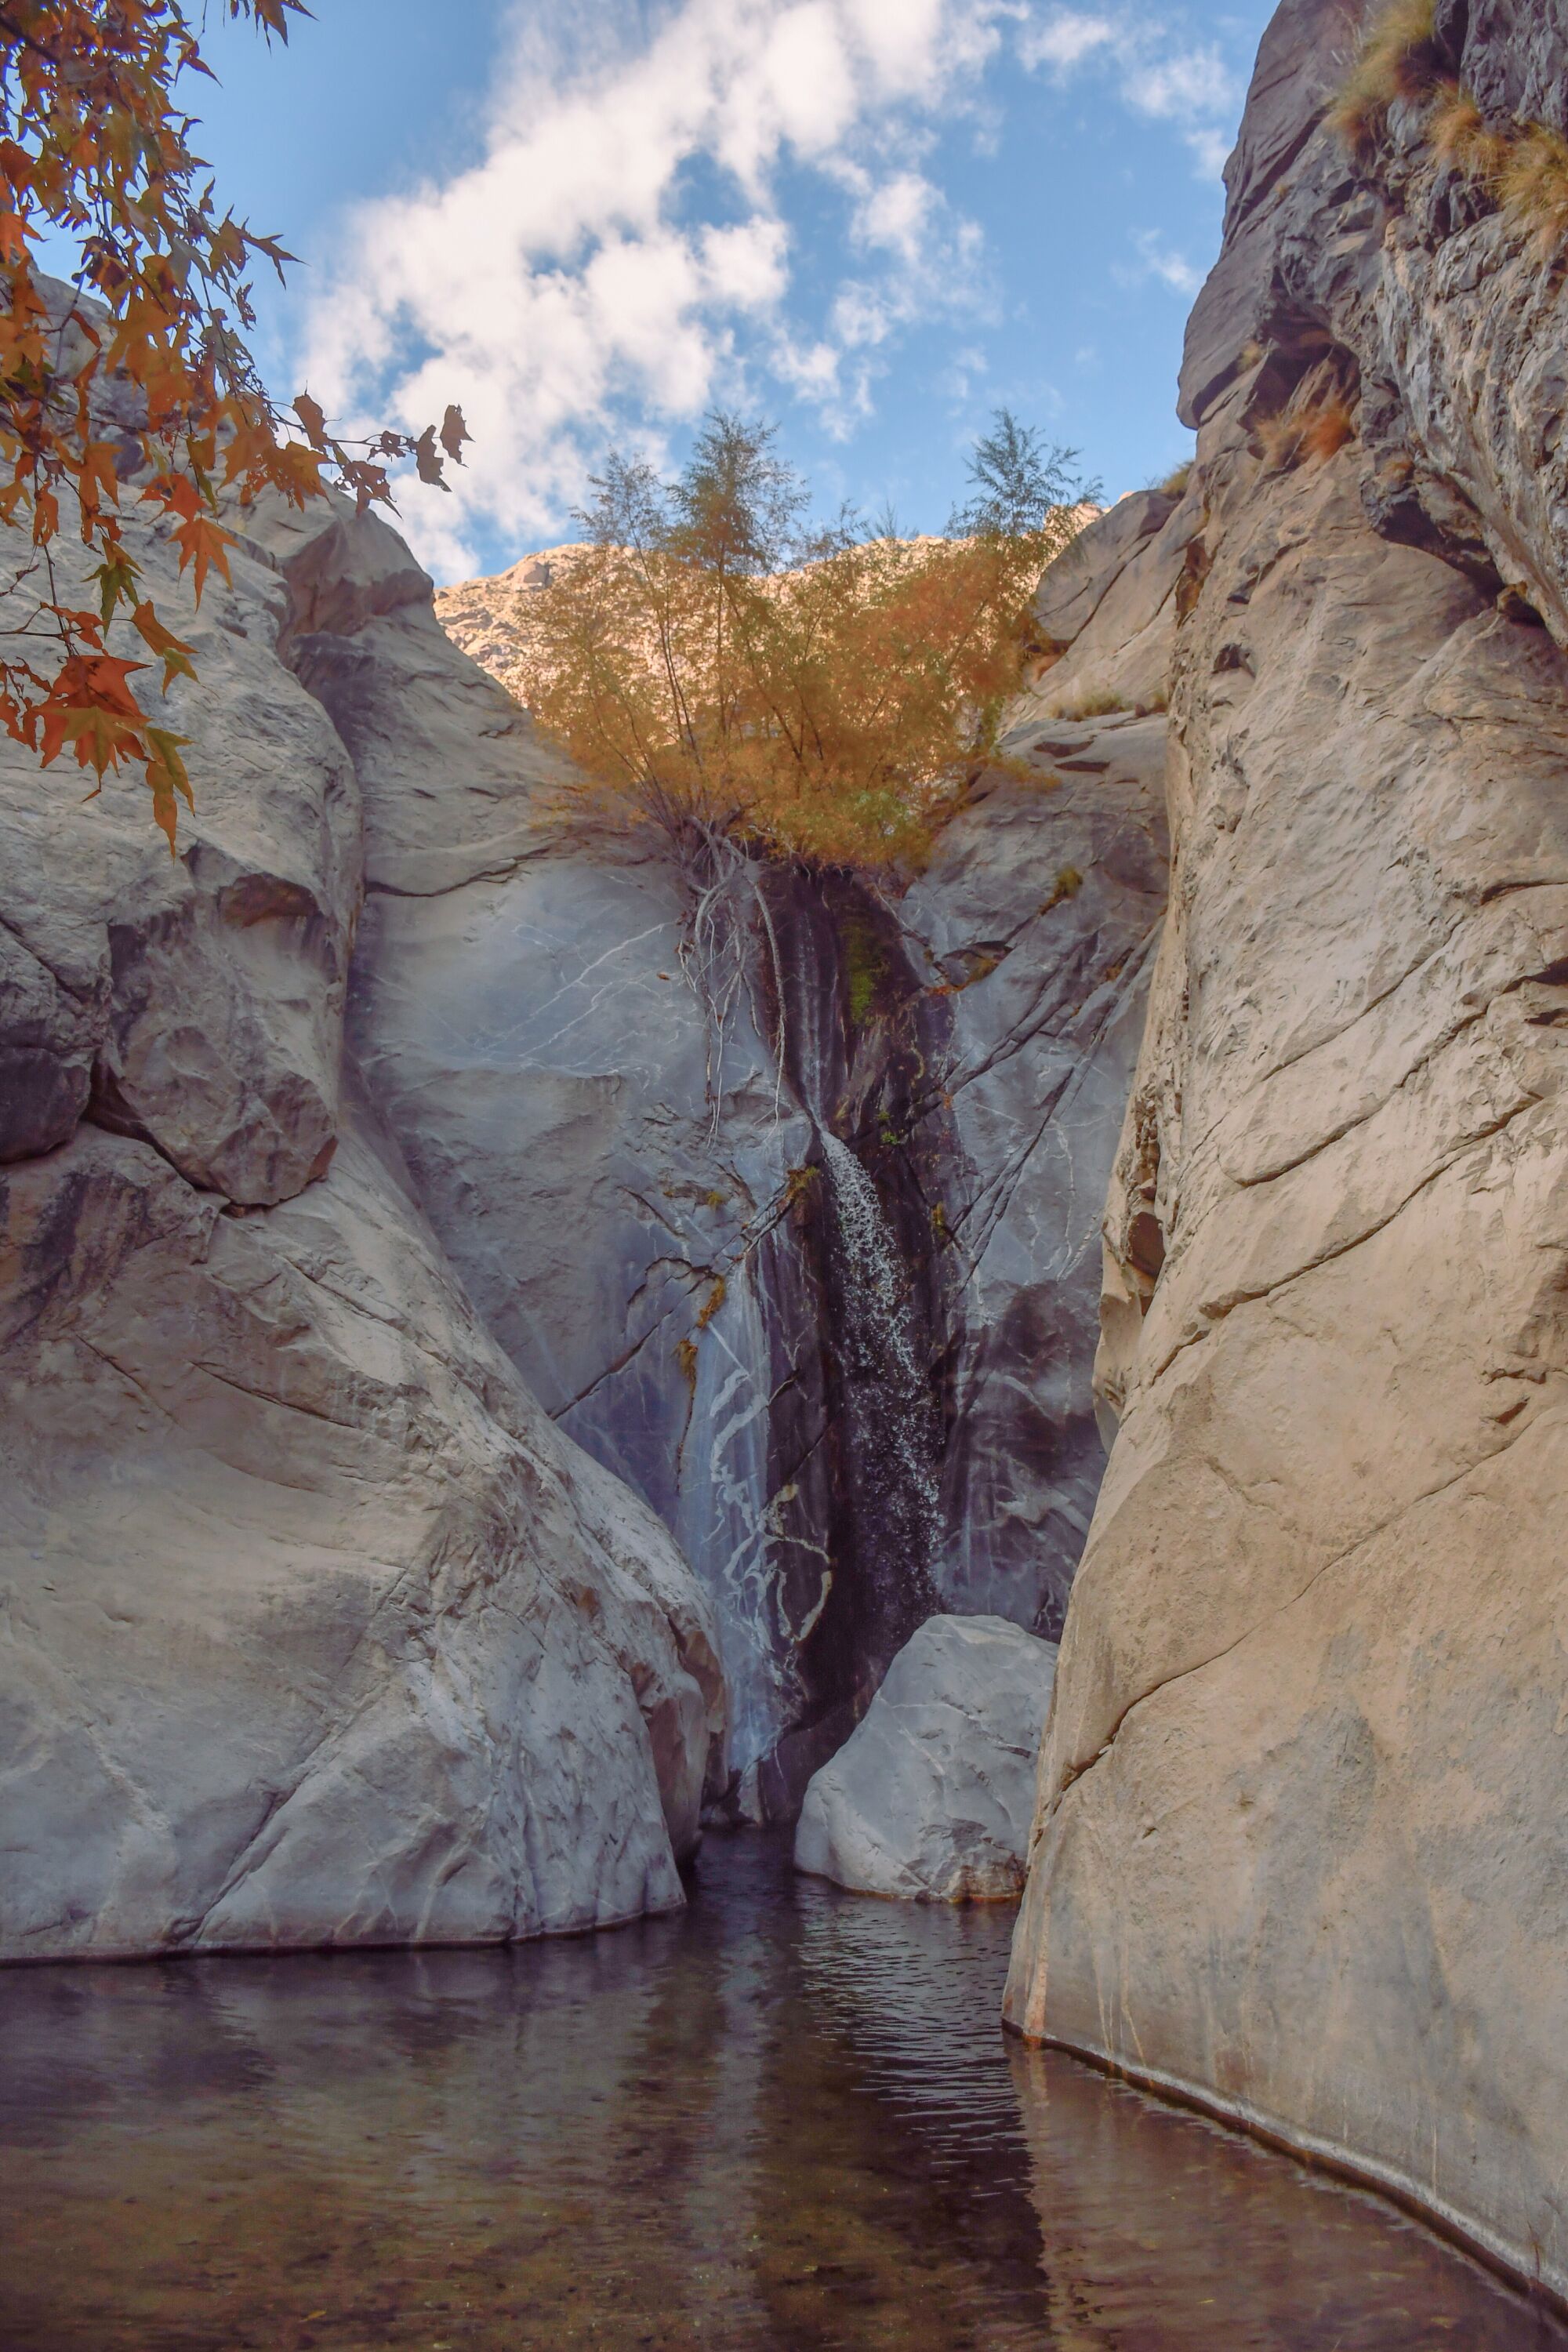 A vertical image of a waterfall amid rocks